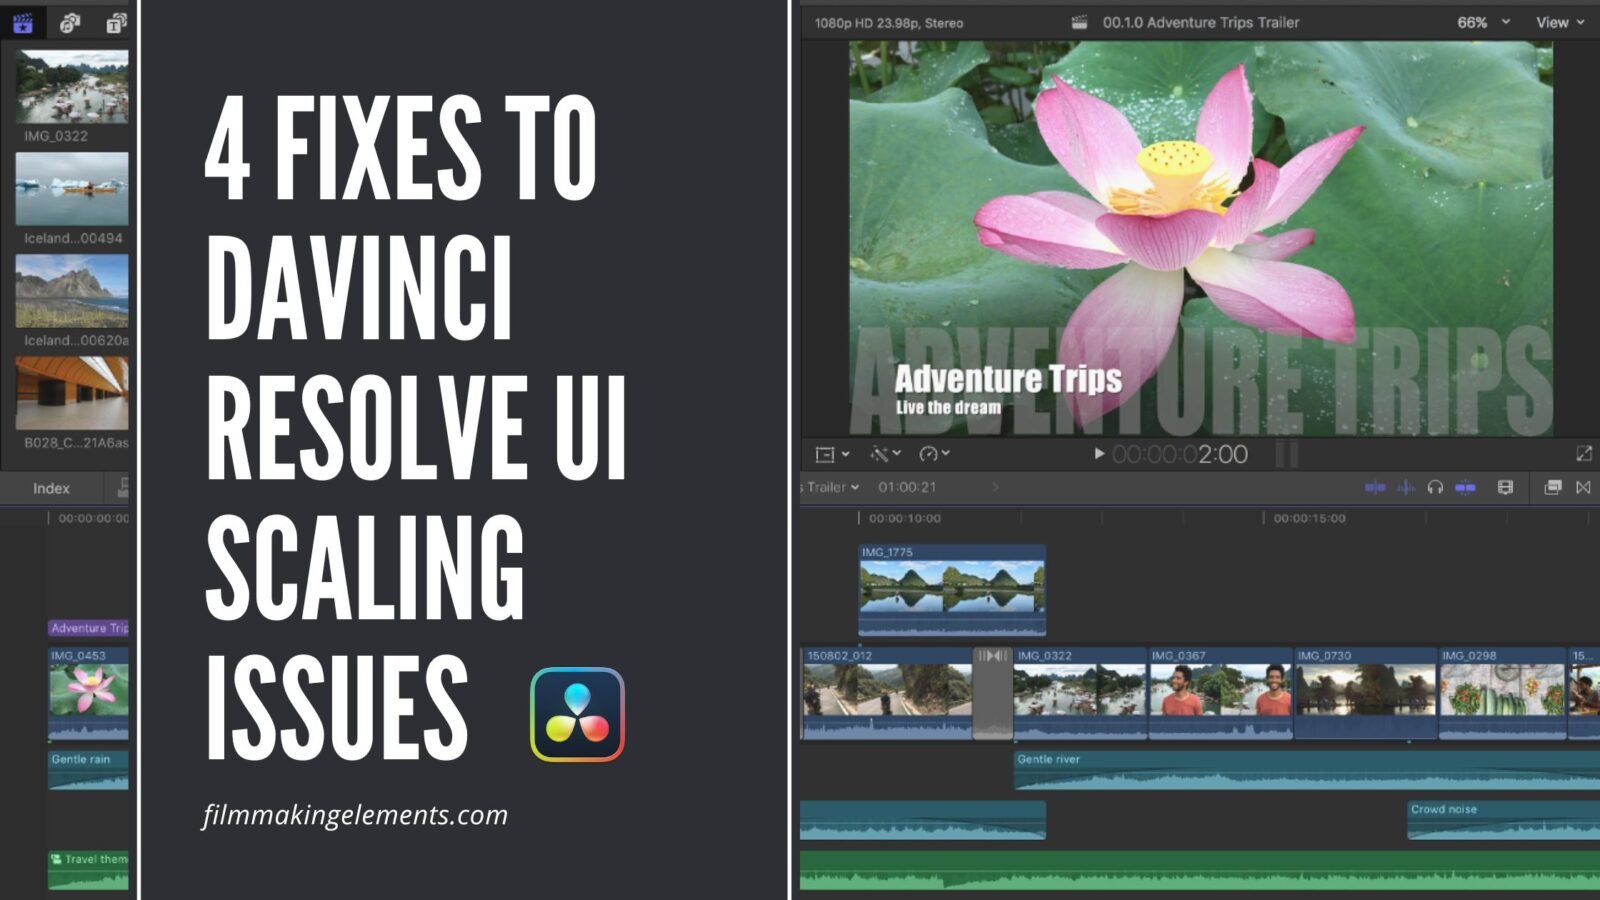 4 Fixes To Davinci Resolve UI Scaling Issues